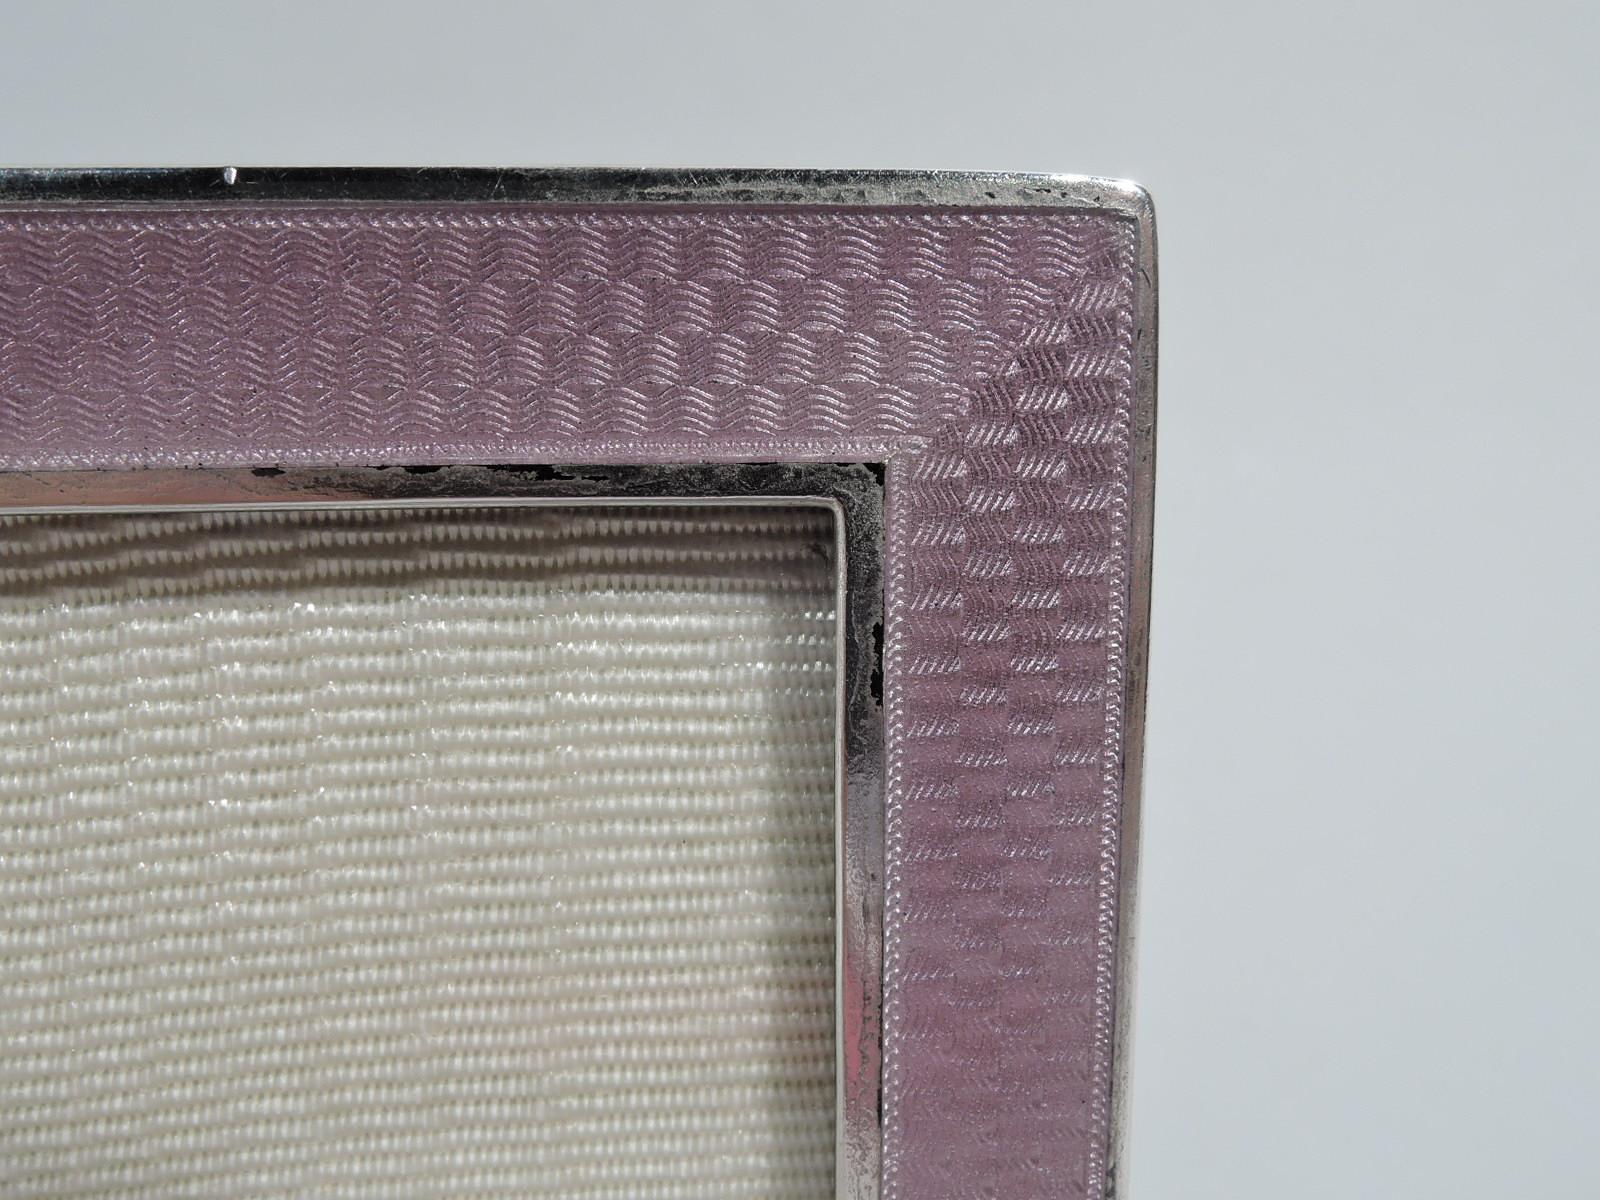 American sterling silver and enamel frame, ca 1915. Retailed by Udall & Ballou in New York. Rectangular window in flat surround with guilloche wave enamel between silver borders; sides silver. Enamel is pink. With glass, silk lining, and wood